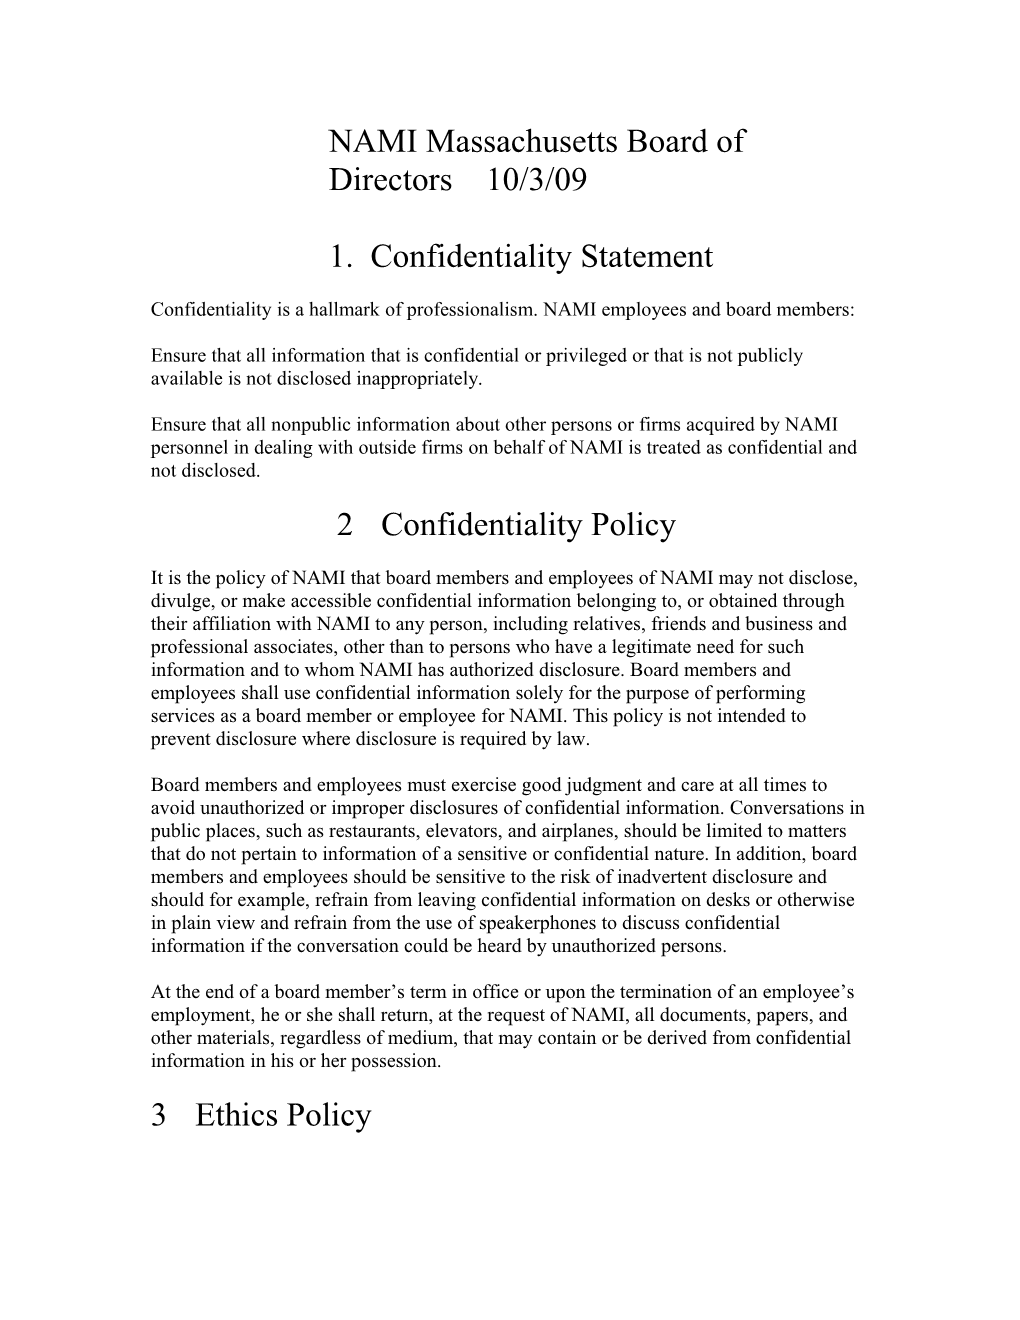 Code of Ethics Policy Approved 2009